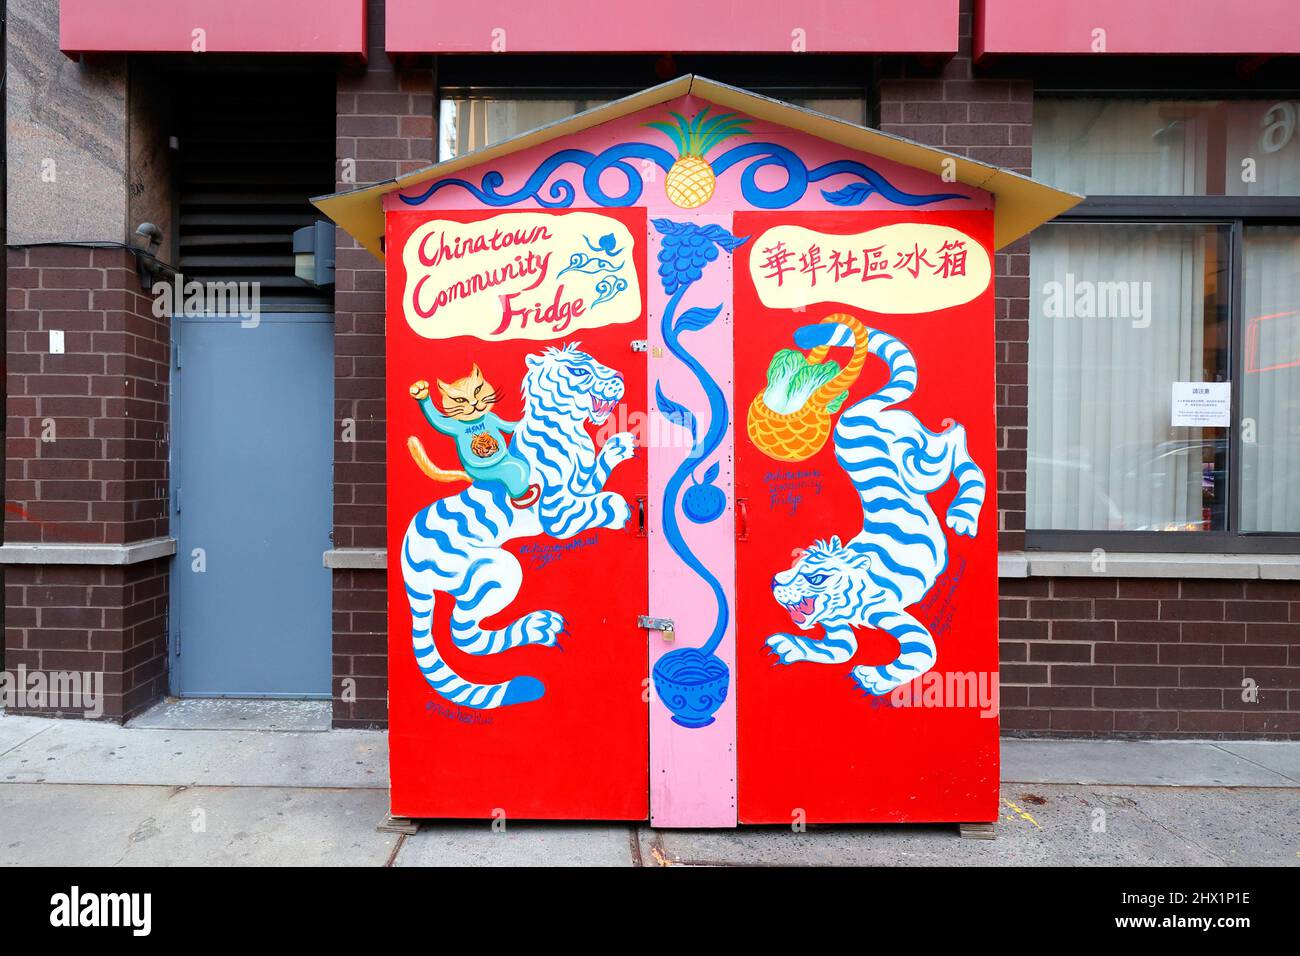 5th March 2022, New York, NY. The Chinatown Community Fridge food bank located outside Chung Pak low income senior citizen housing in Chinatown ... Stock Photo